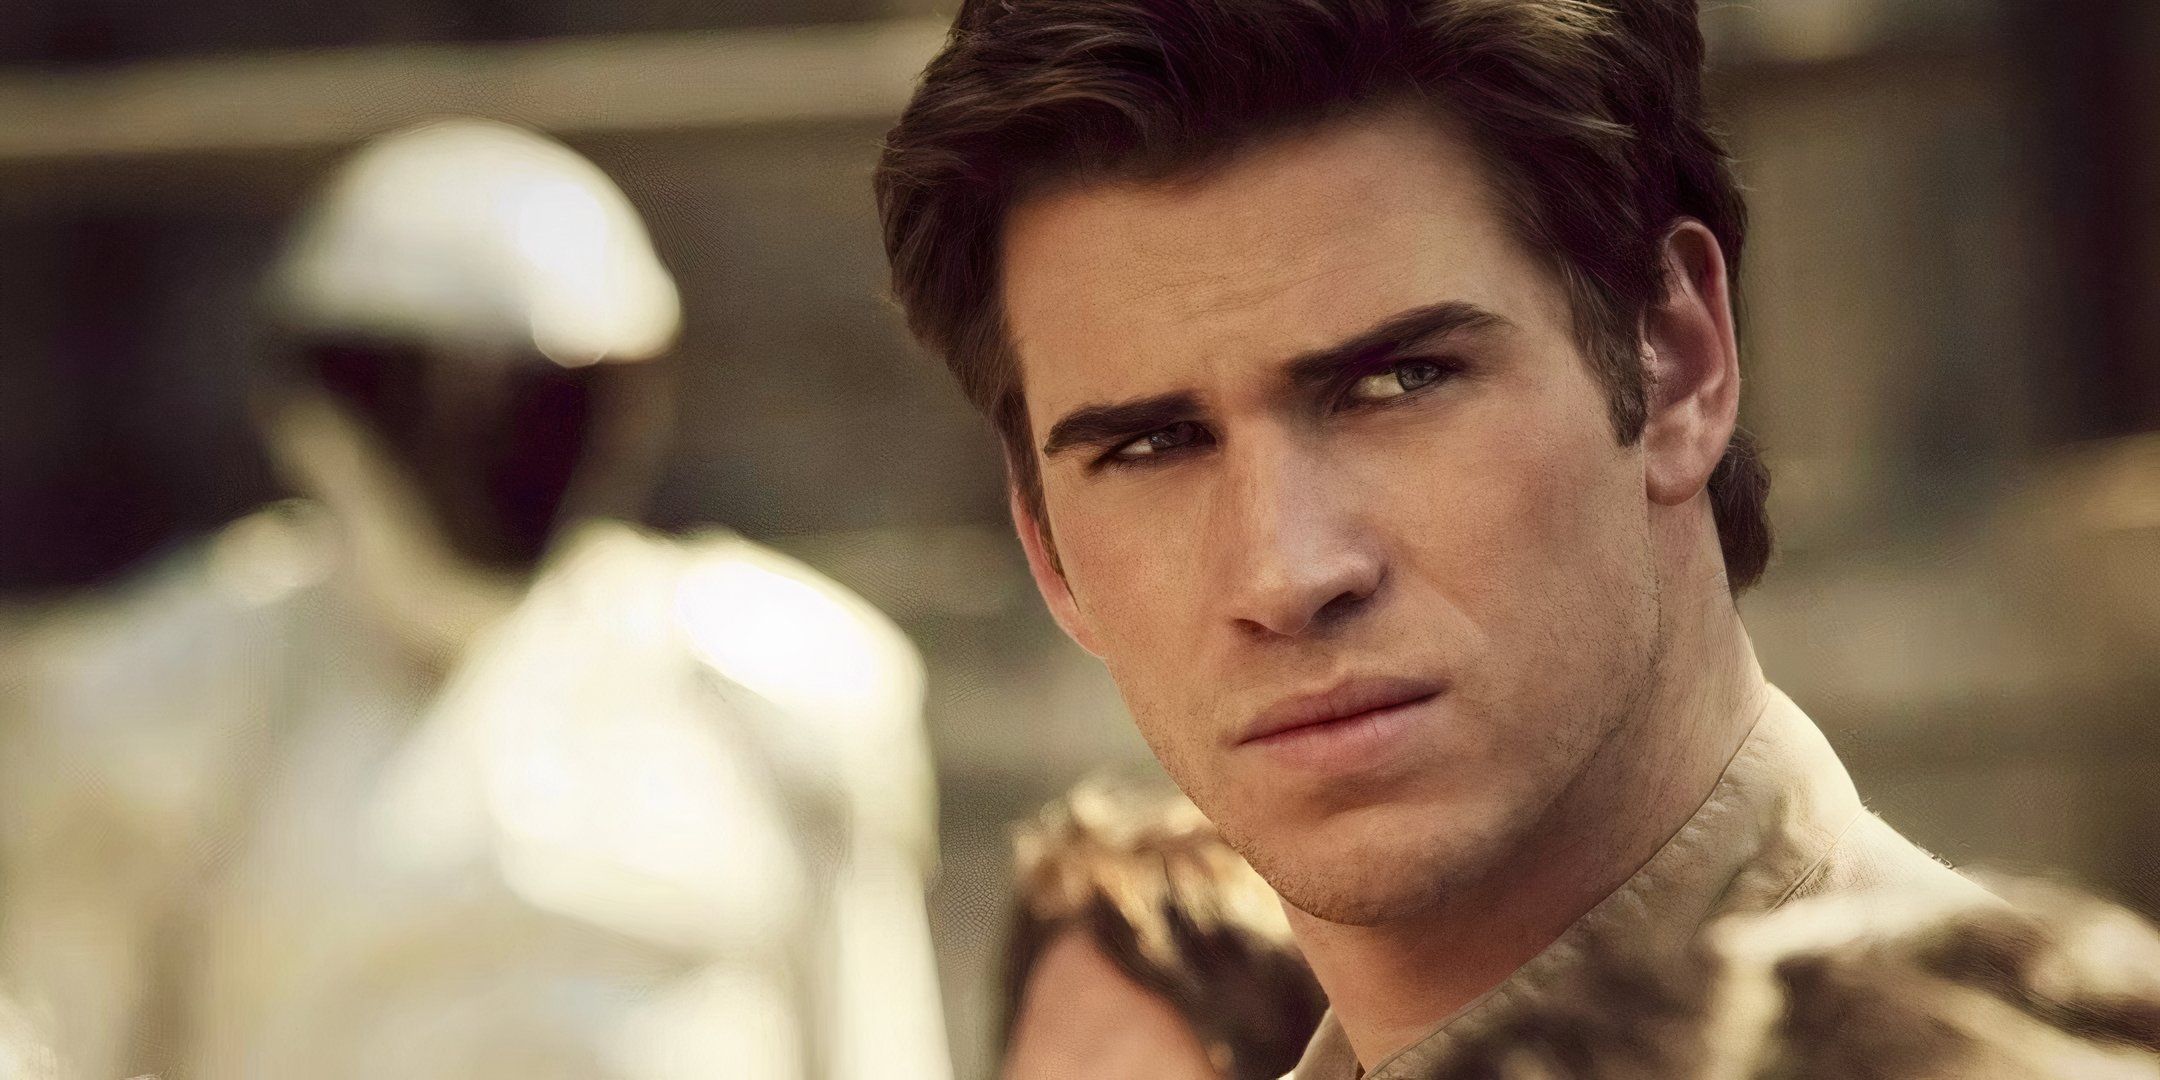 Gale Hawthorne (Liam Hemsworth) from The Hunger Games stands in District 12 at the Reaping, looking angry